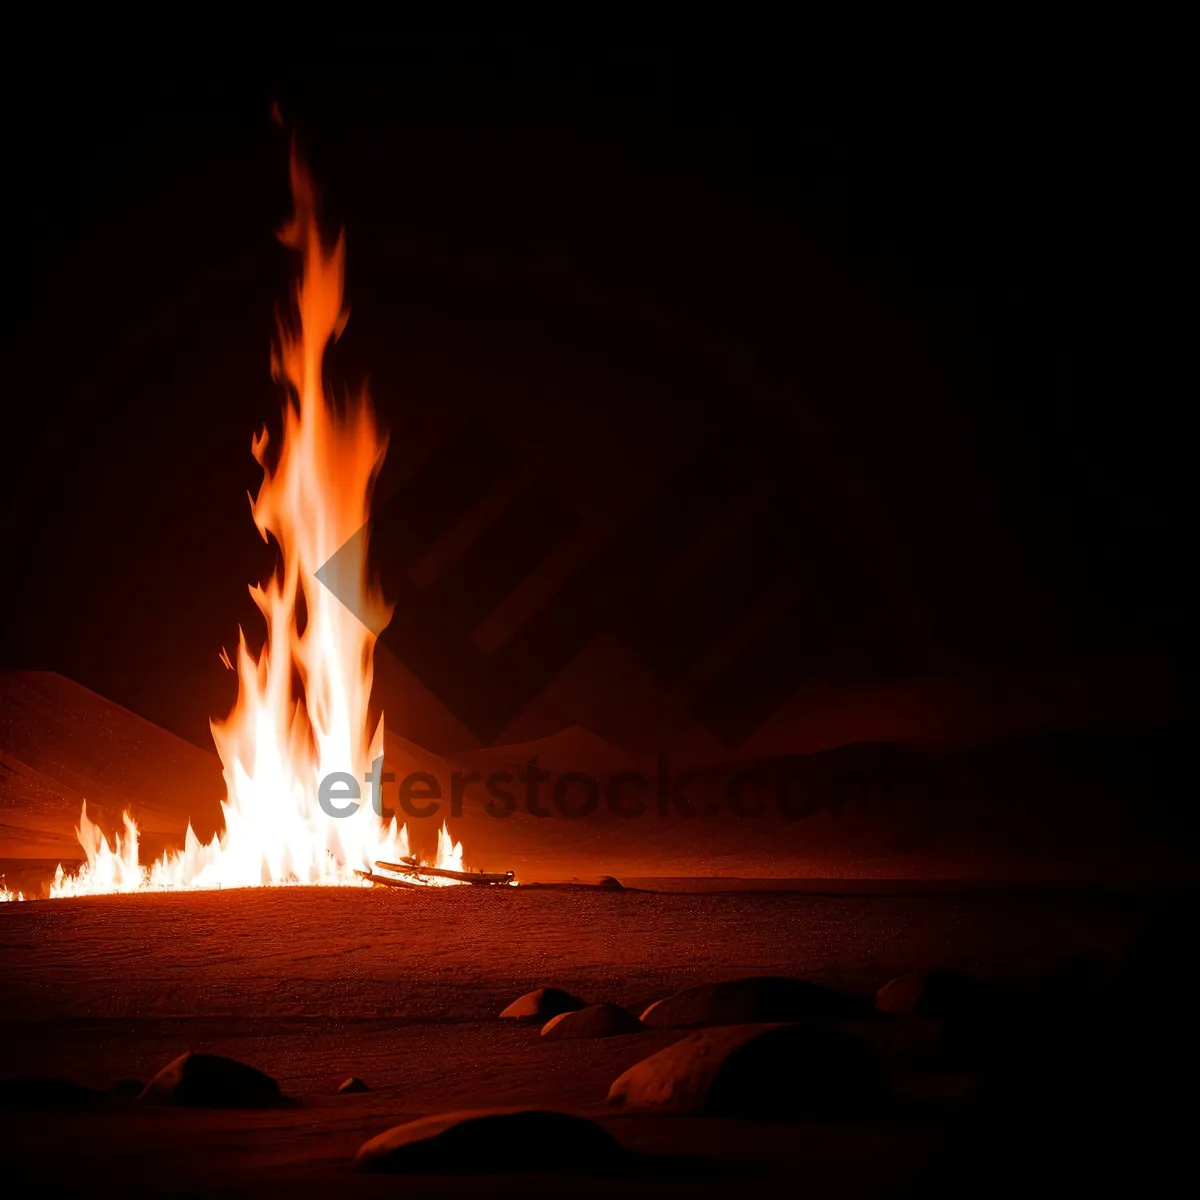 Picture of Blazing Bonfire: A Fiery Display of Warmth and Light